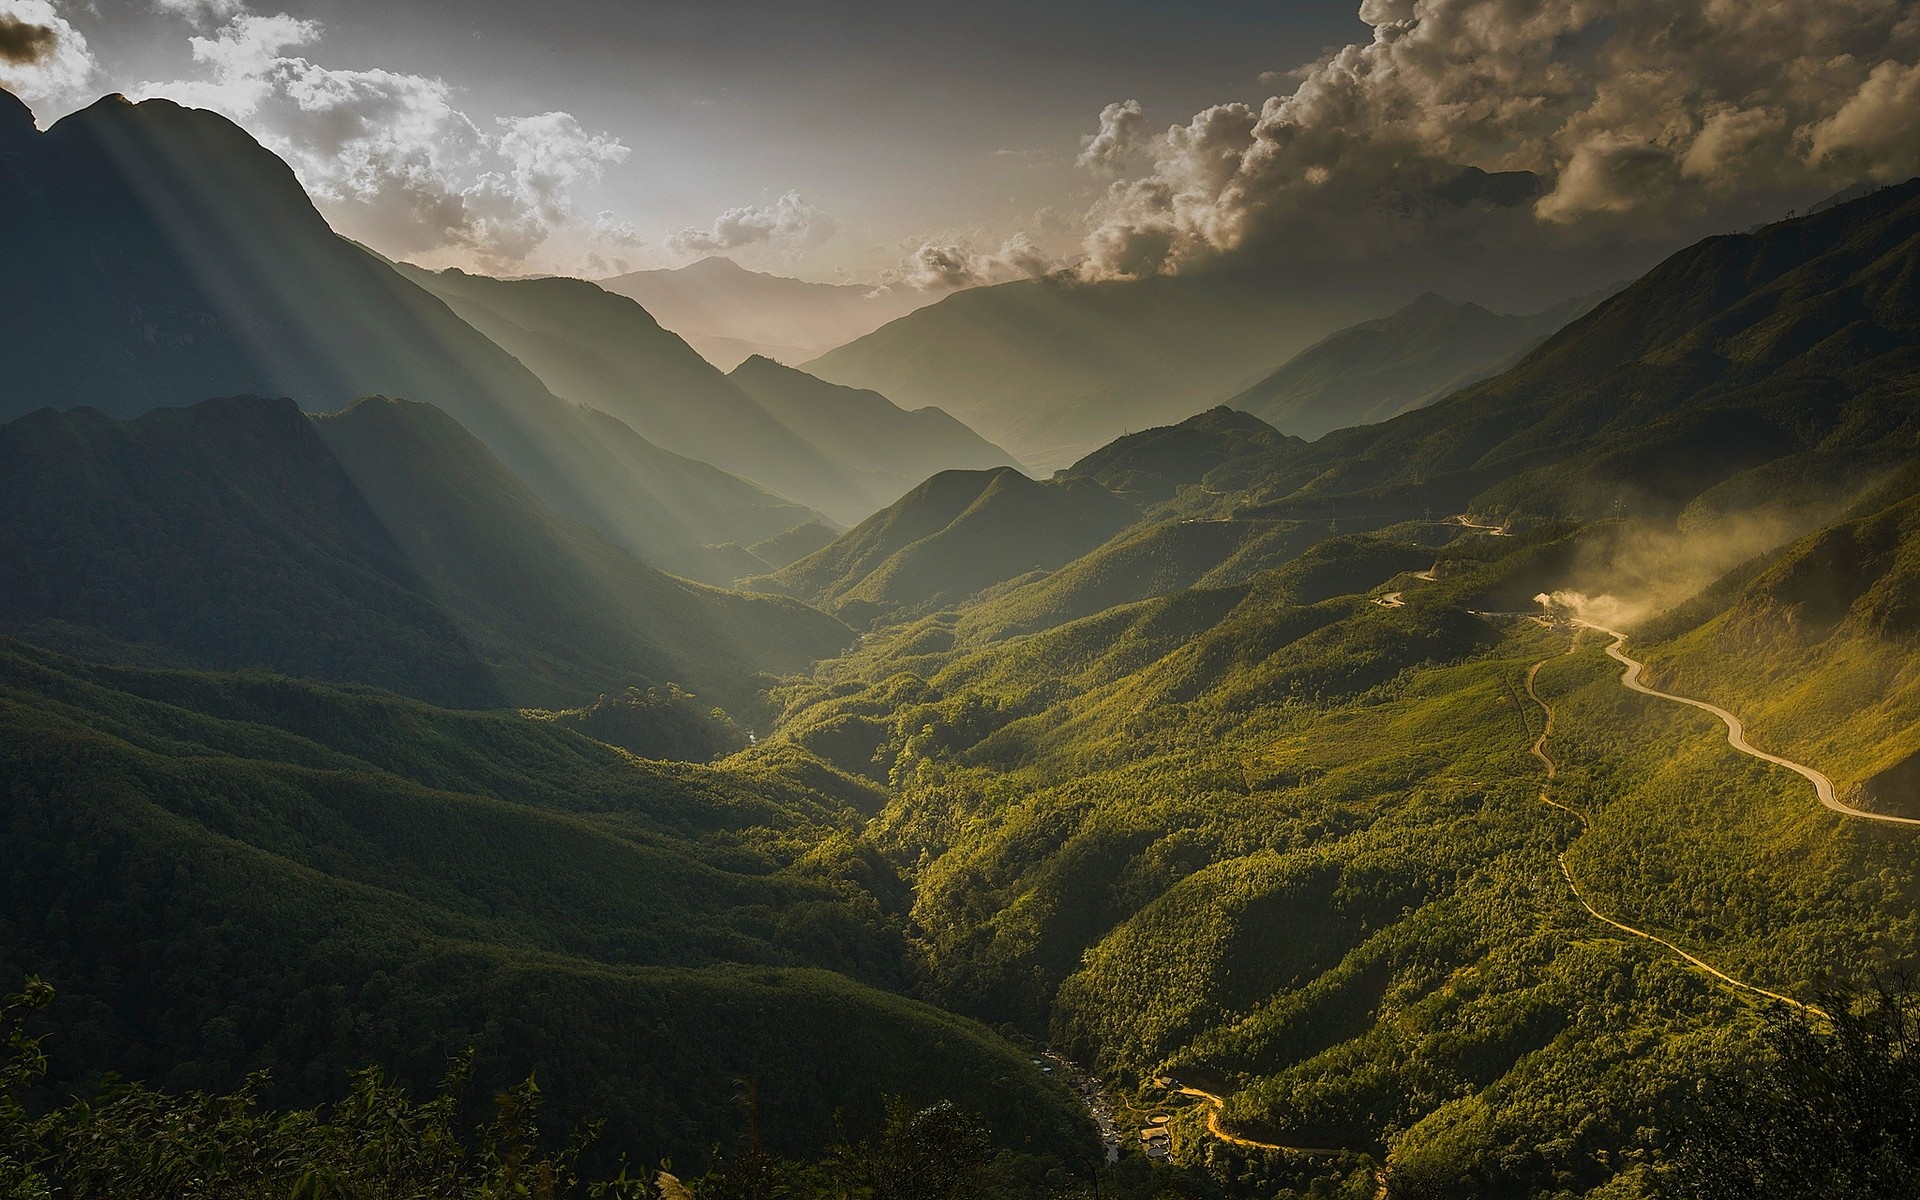 General 1920x1200 nature landscape sun rays mountains valley river mist clouds forest dirt road Vietnam Asia